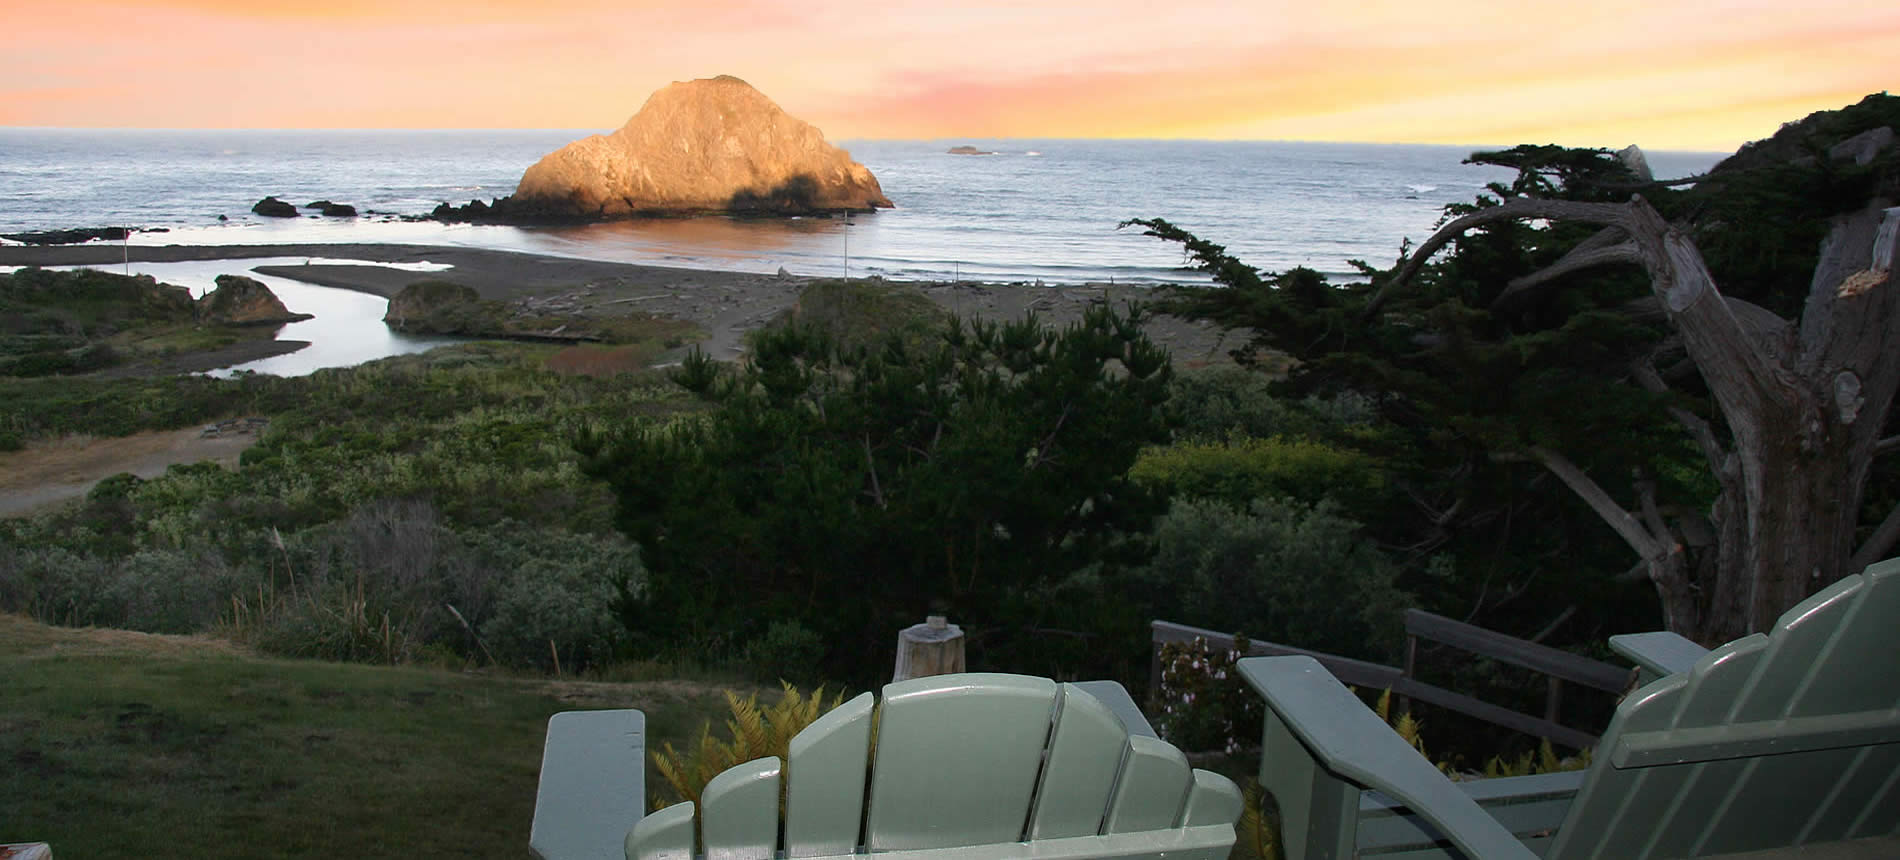 mendocino coast lodging at elk cove inn bed and breakfast colorful sunrise